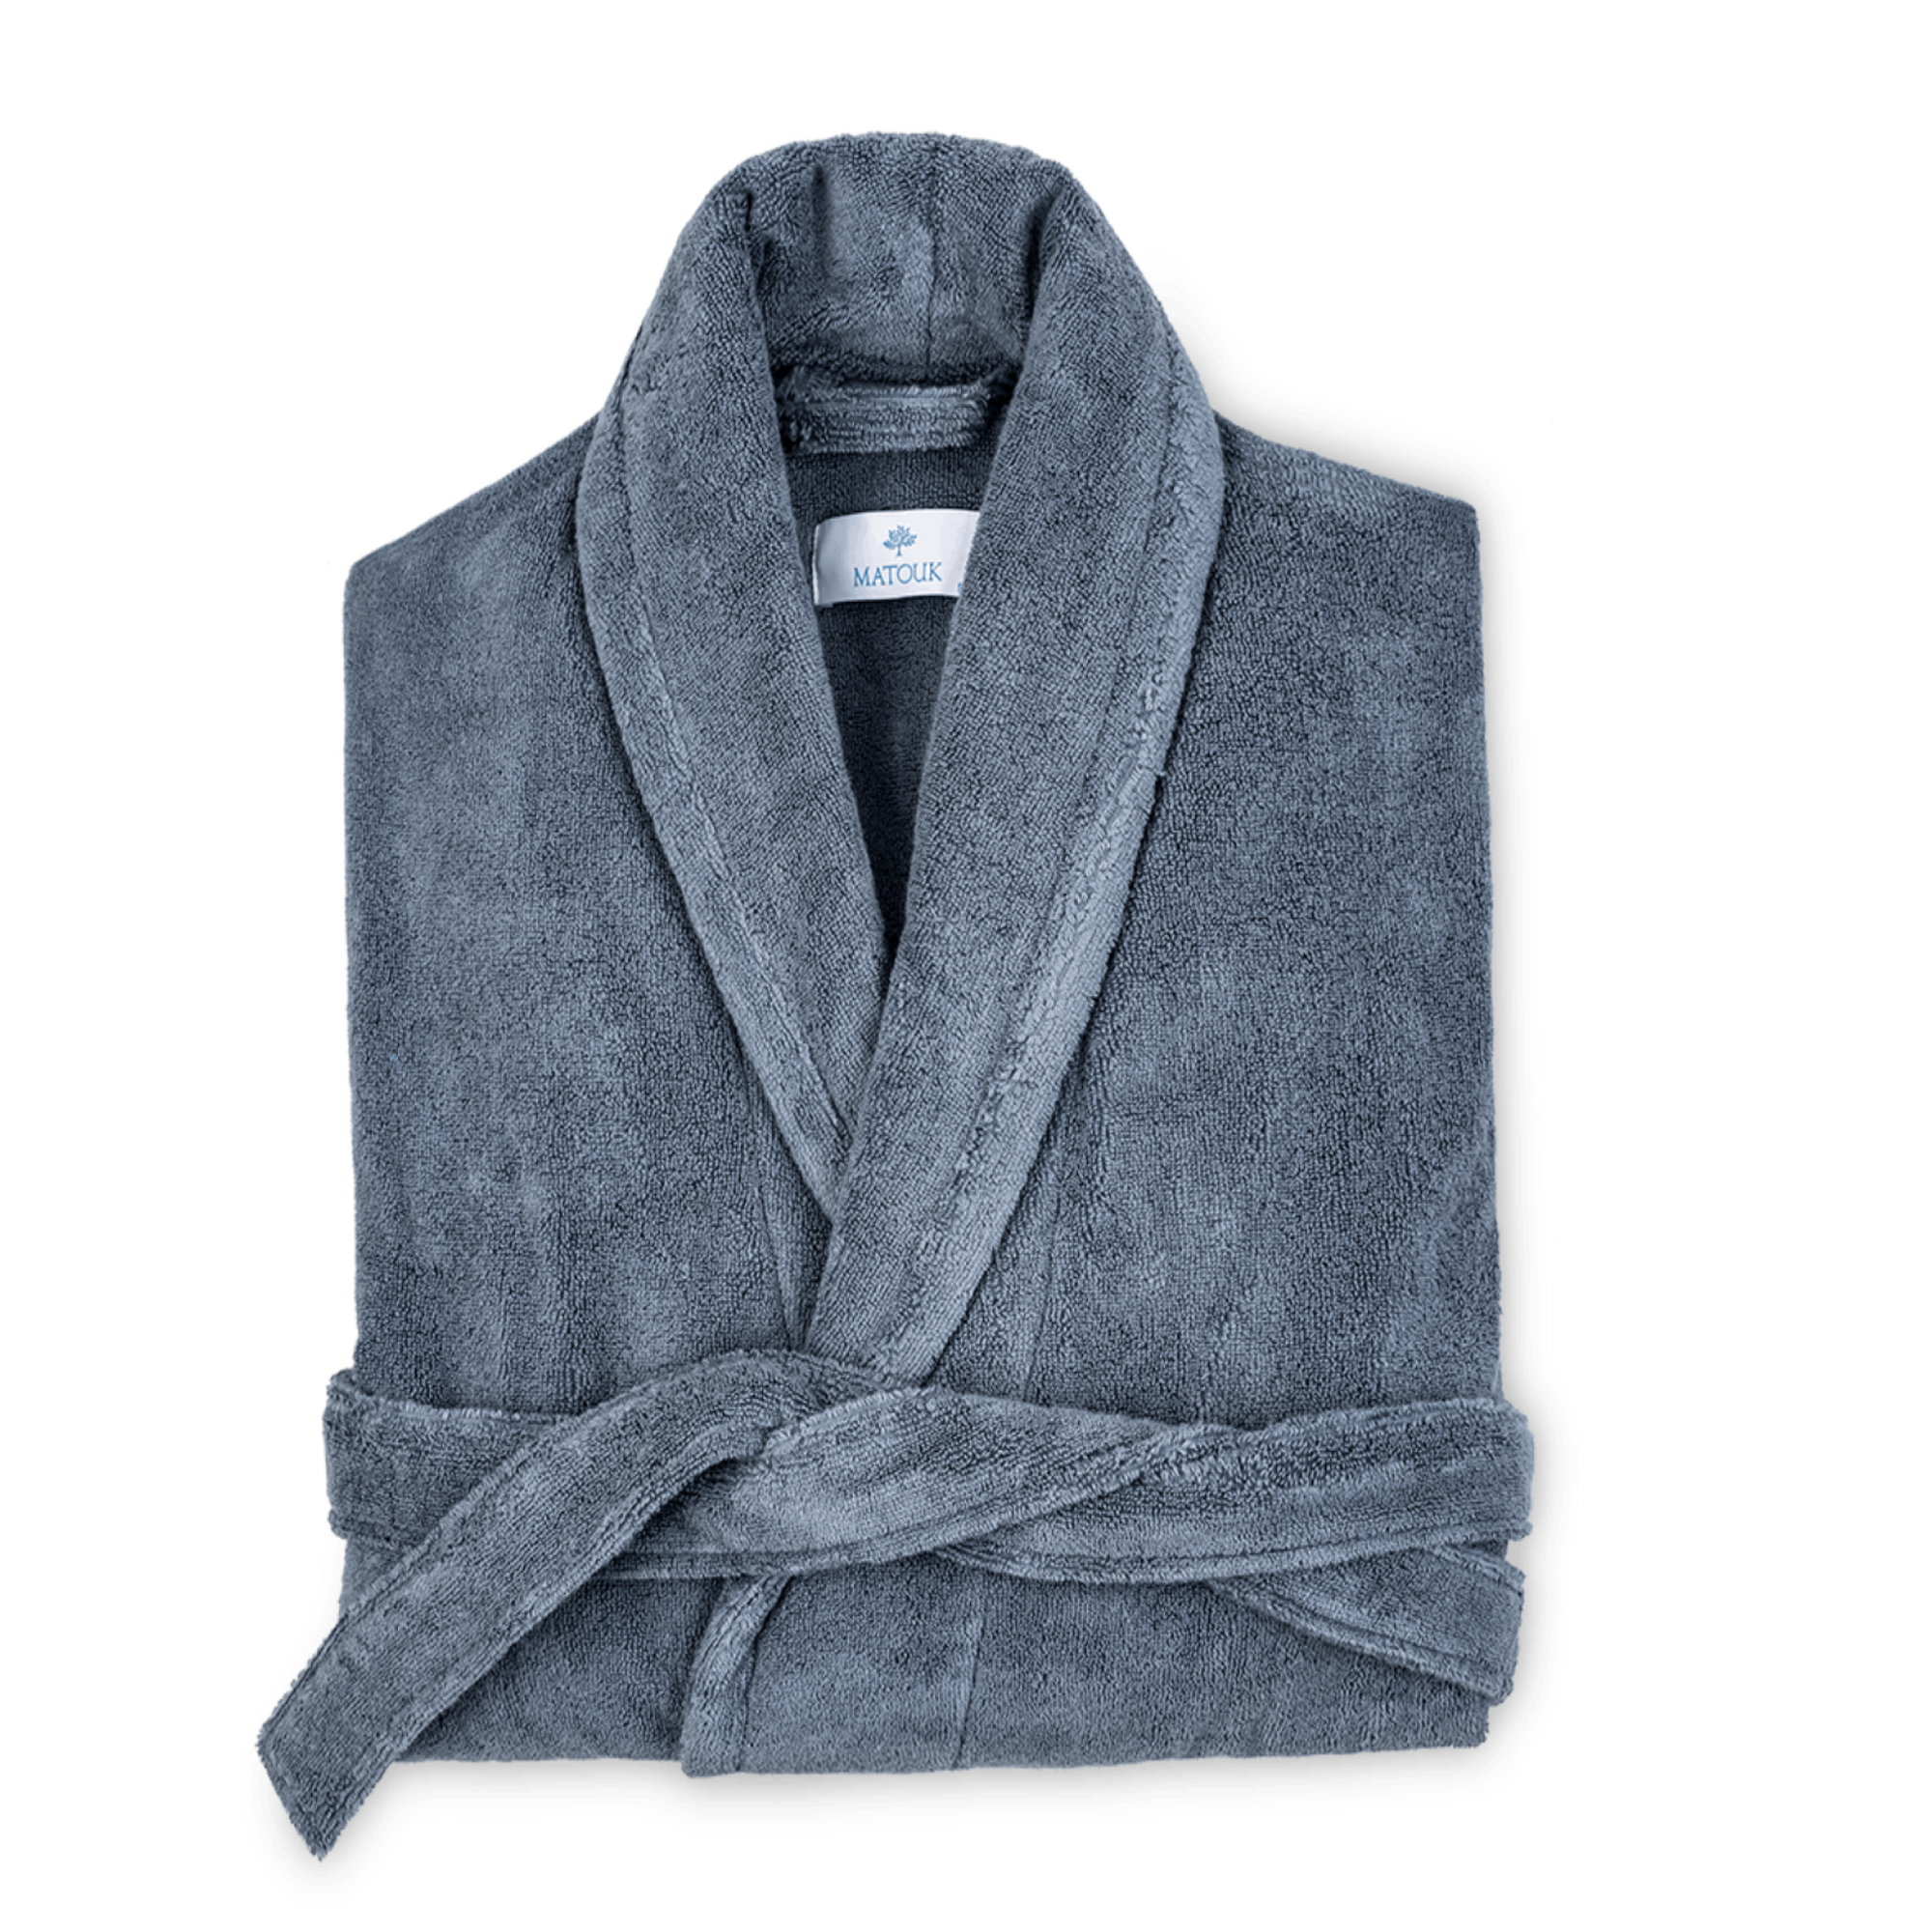 Clear Sample Image of Matouk Milagro Bath Robe in Night Color